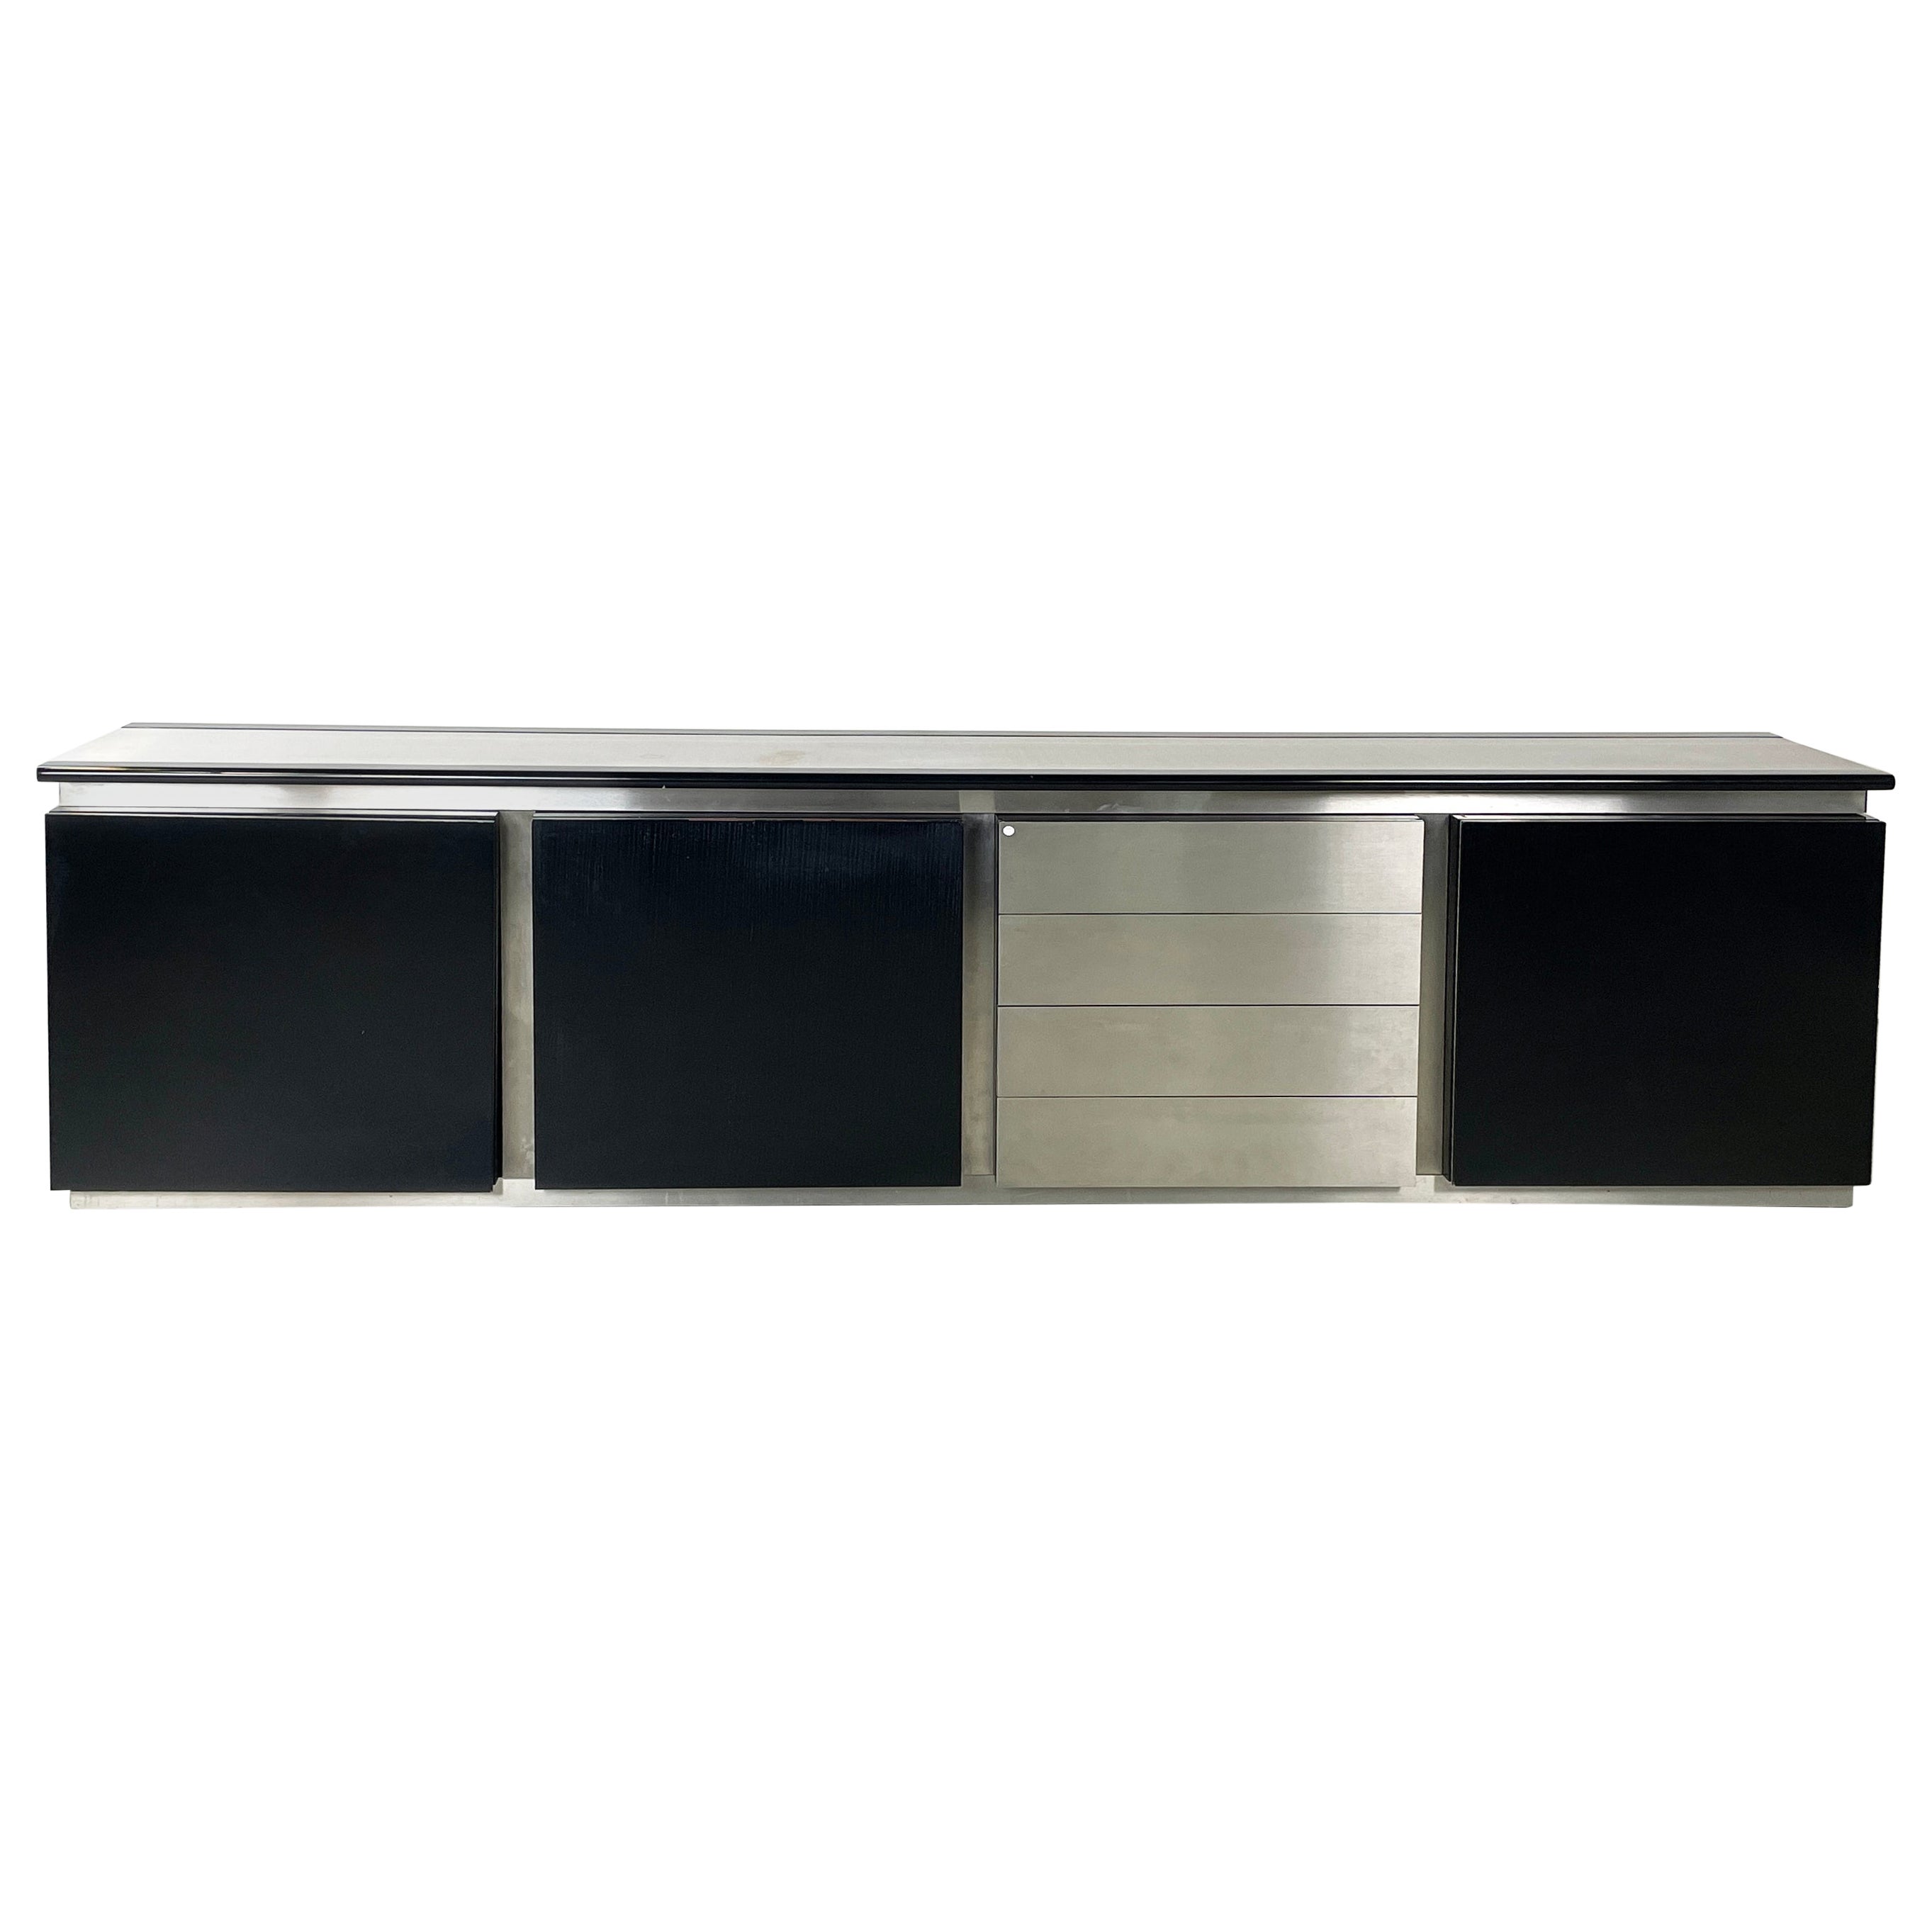 Italian modern Sideboard Parioli  by Wick and Acerbis for Acerbis, 1980s For Sale